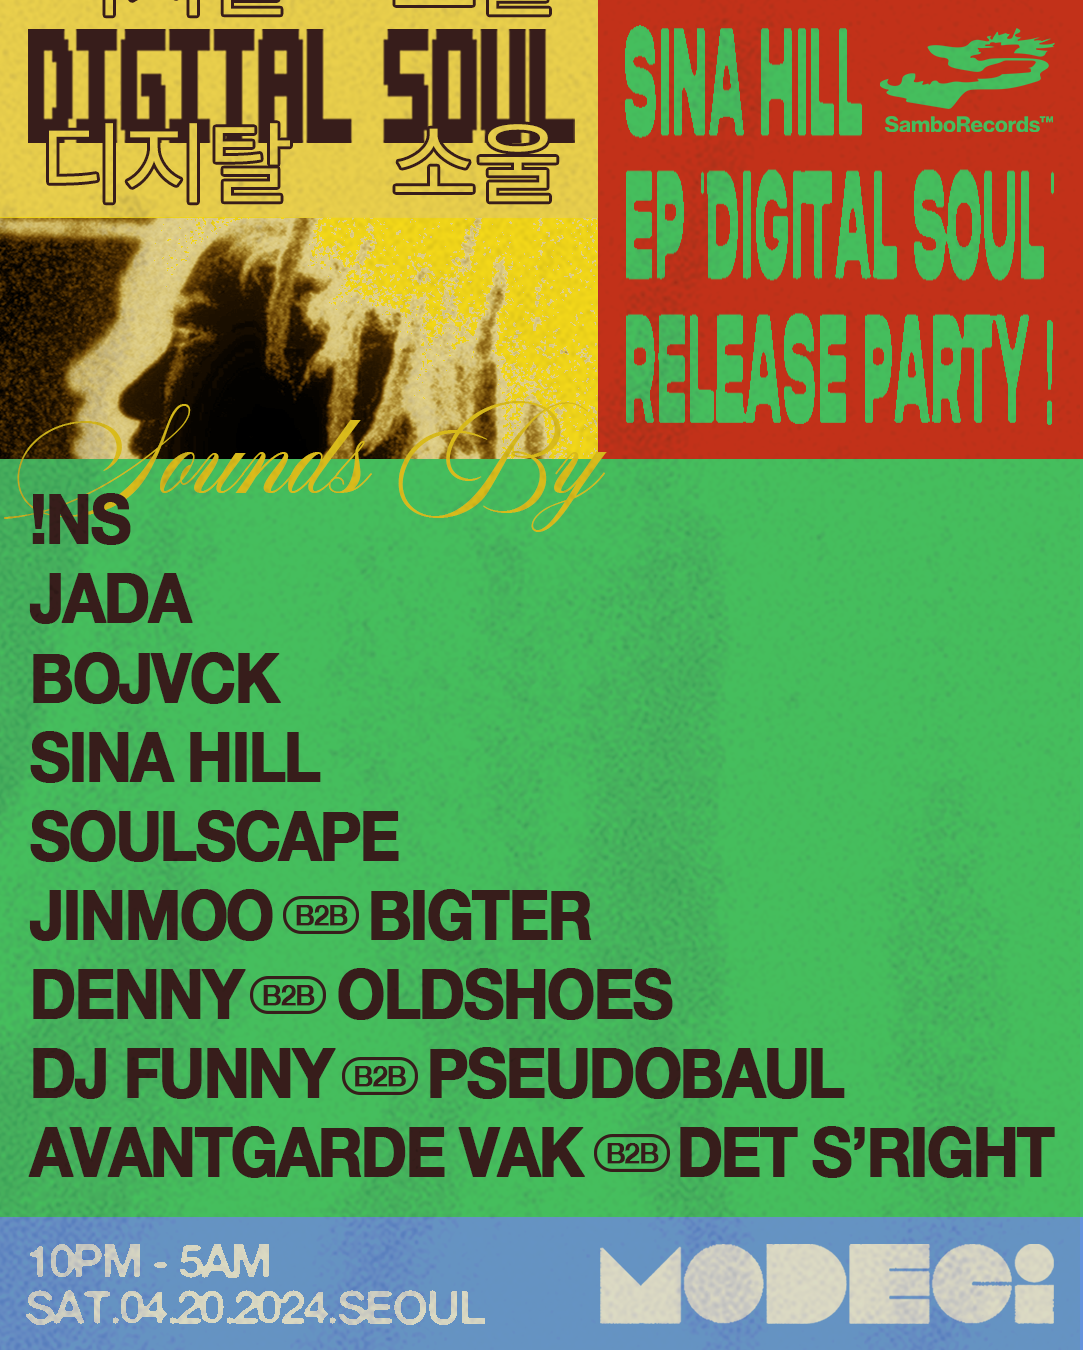 Sina Hill 'DIGITAL SOUL' EP Vinyl Release Party - フライヤー表